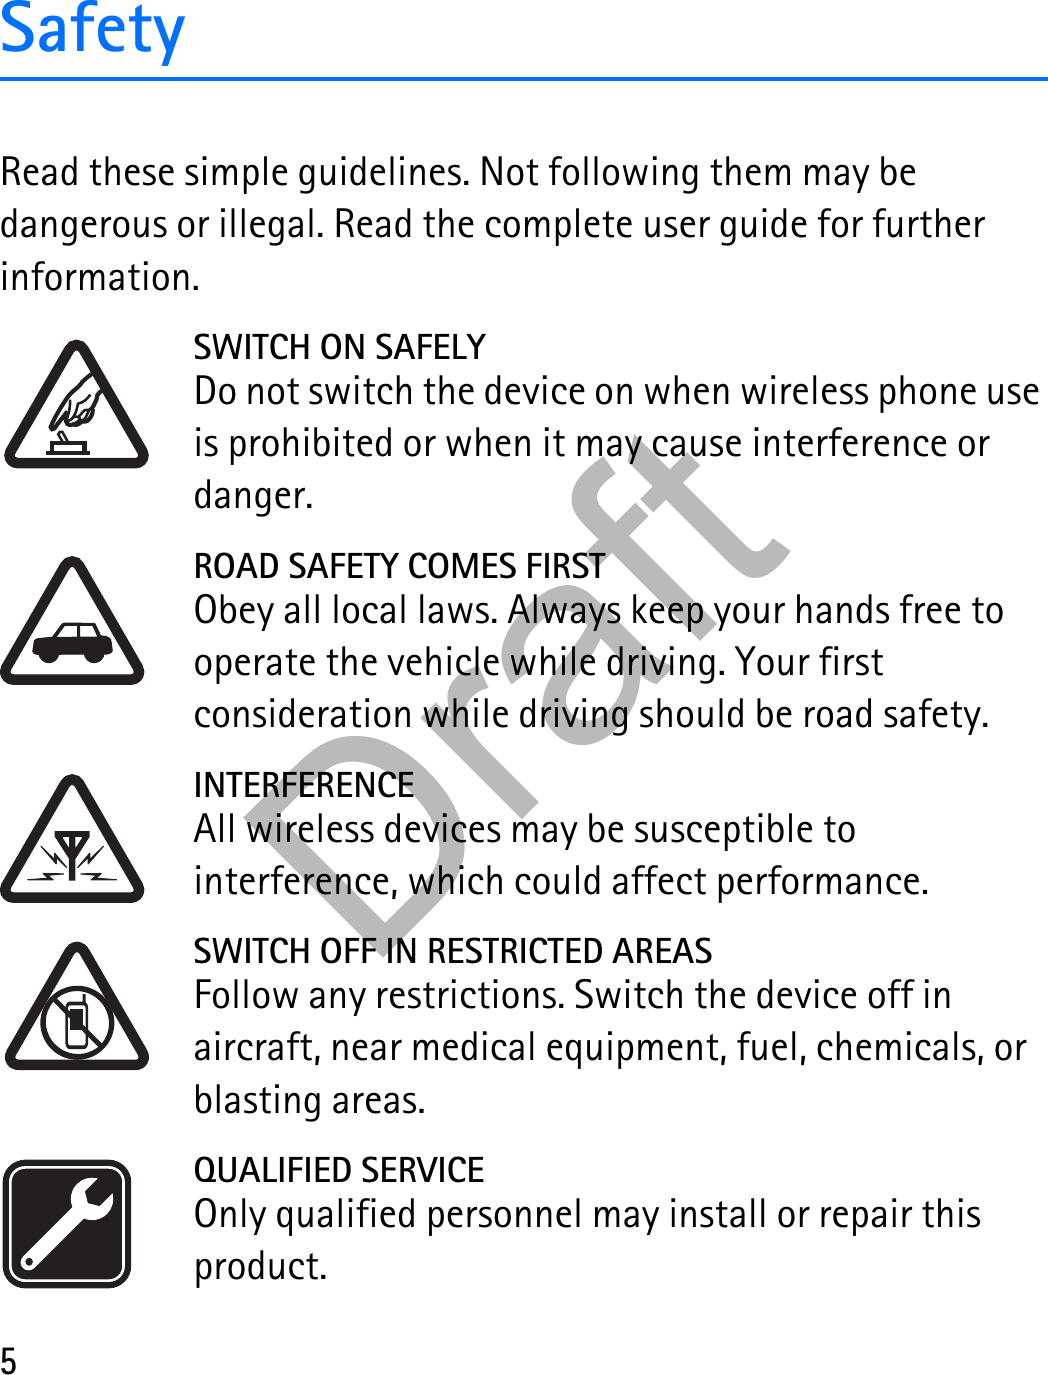 5SafetyRead these simple guidelines. Not following them may be dangerous or illegal. Read the complete user guide for further information. SWITCH ON SAFELYDo not switch the device on when wireless phone use is prohibited or when it may cause interference or danger.ROAD SAFETY COMES FIRSTObey all local laws. Always keep your hands free to operate the vehicle while driving. Your first consideration while driving should be road safety.INTERFERENCEAll wireless devices may be susceptible to interference, which could affect performance.SWITCH OFF IN RESTRICTED AREASFollow any restrictions. Switch the device off in aircraft, near medical equipment, fuel, chemicals, or blasting areas.QUALIFIED SERVICEOnly qualified personnel may install or repair this product.Draft